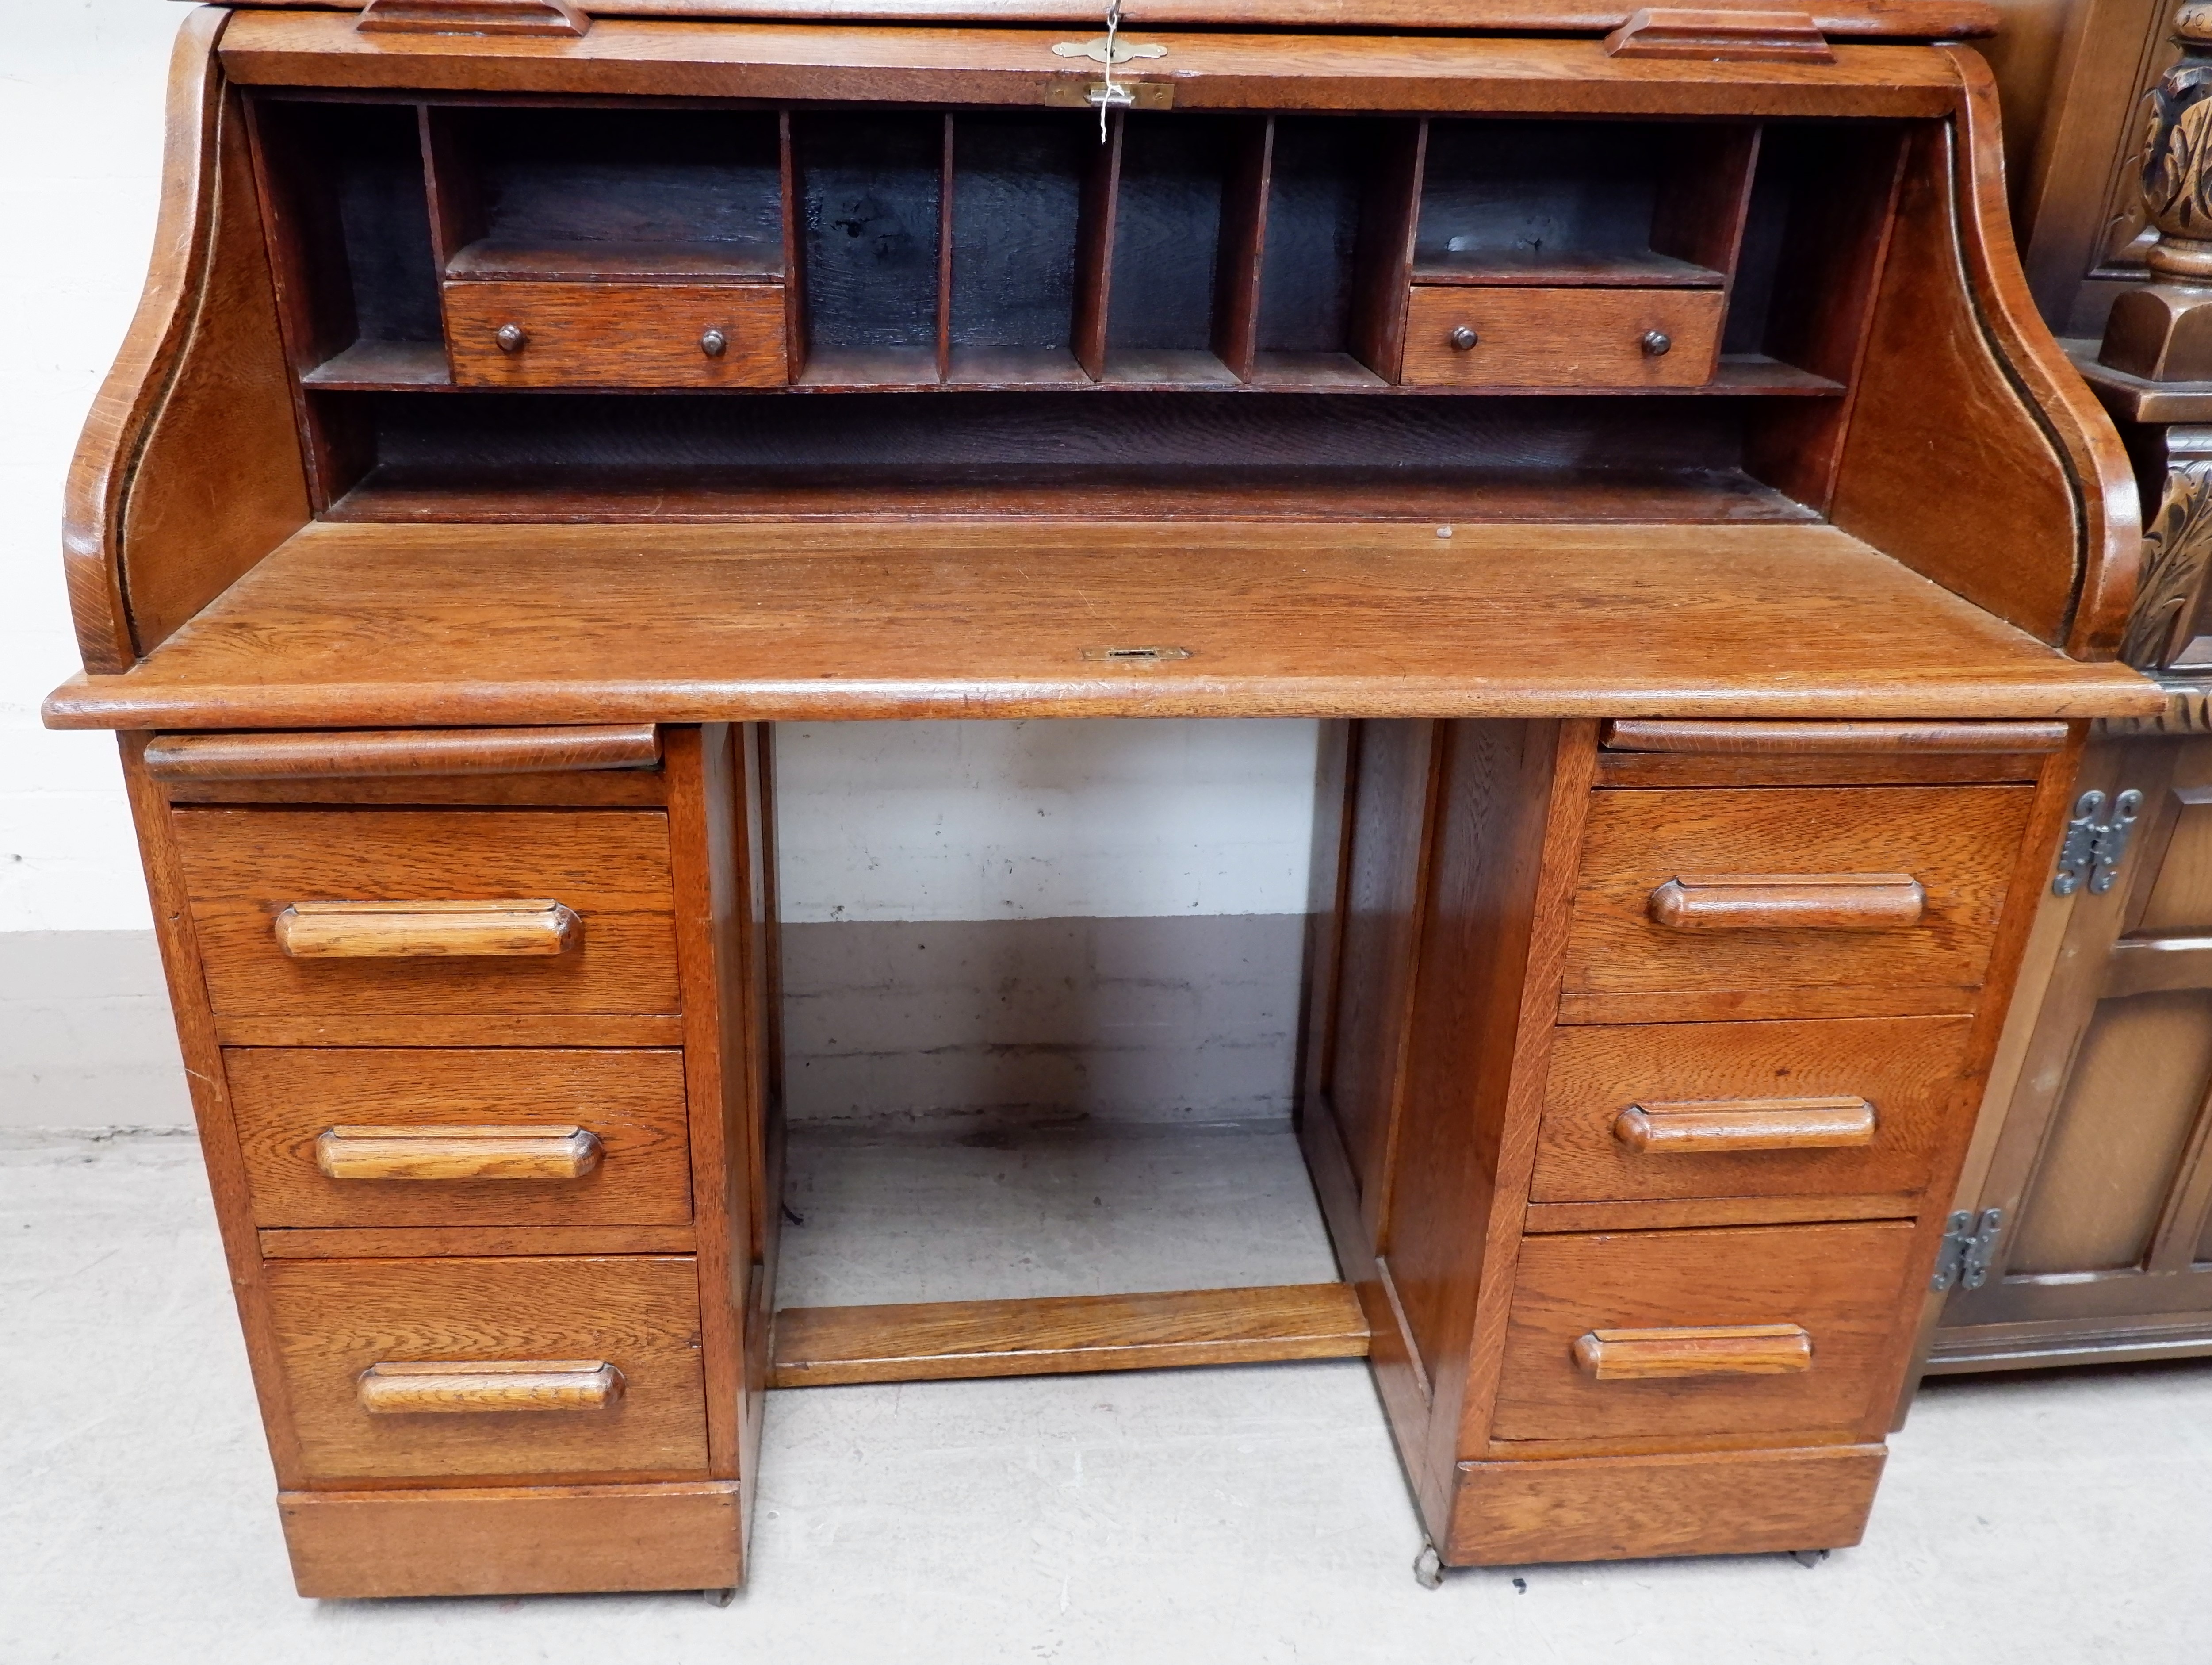 An early 20th century roll top desk with 'S' shaped scroll, part fitted interior and 6 drawers